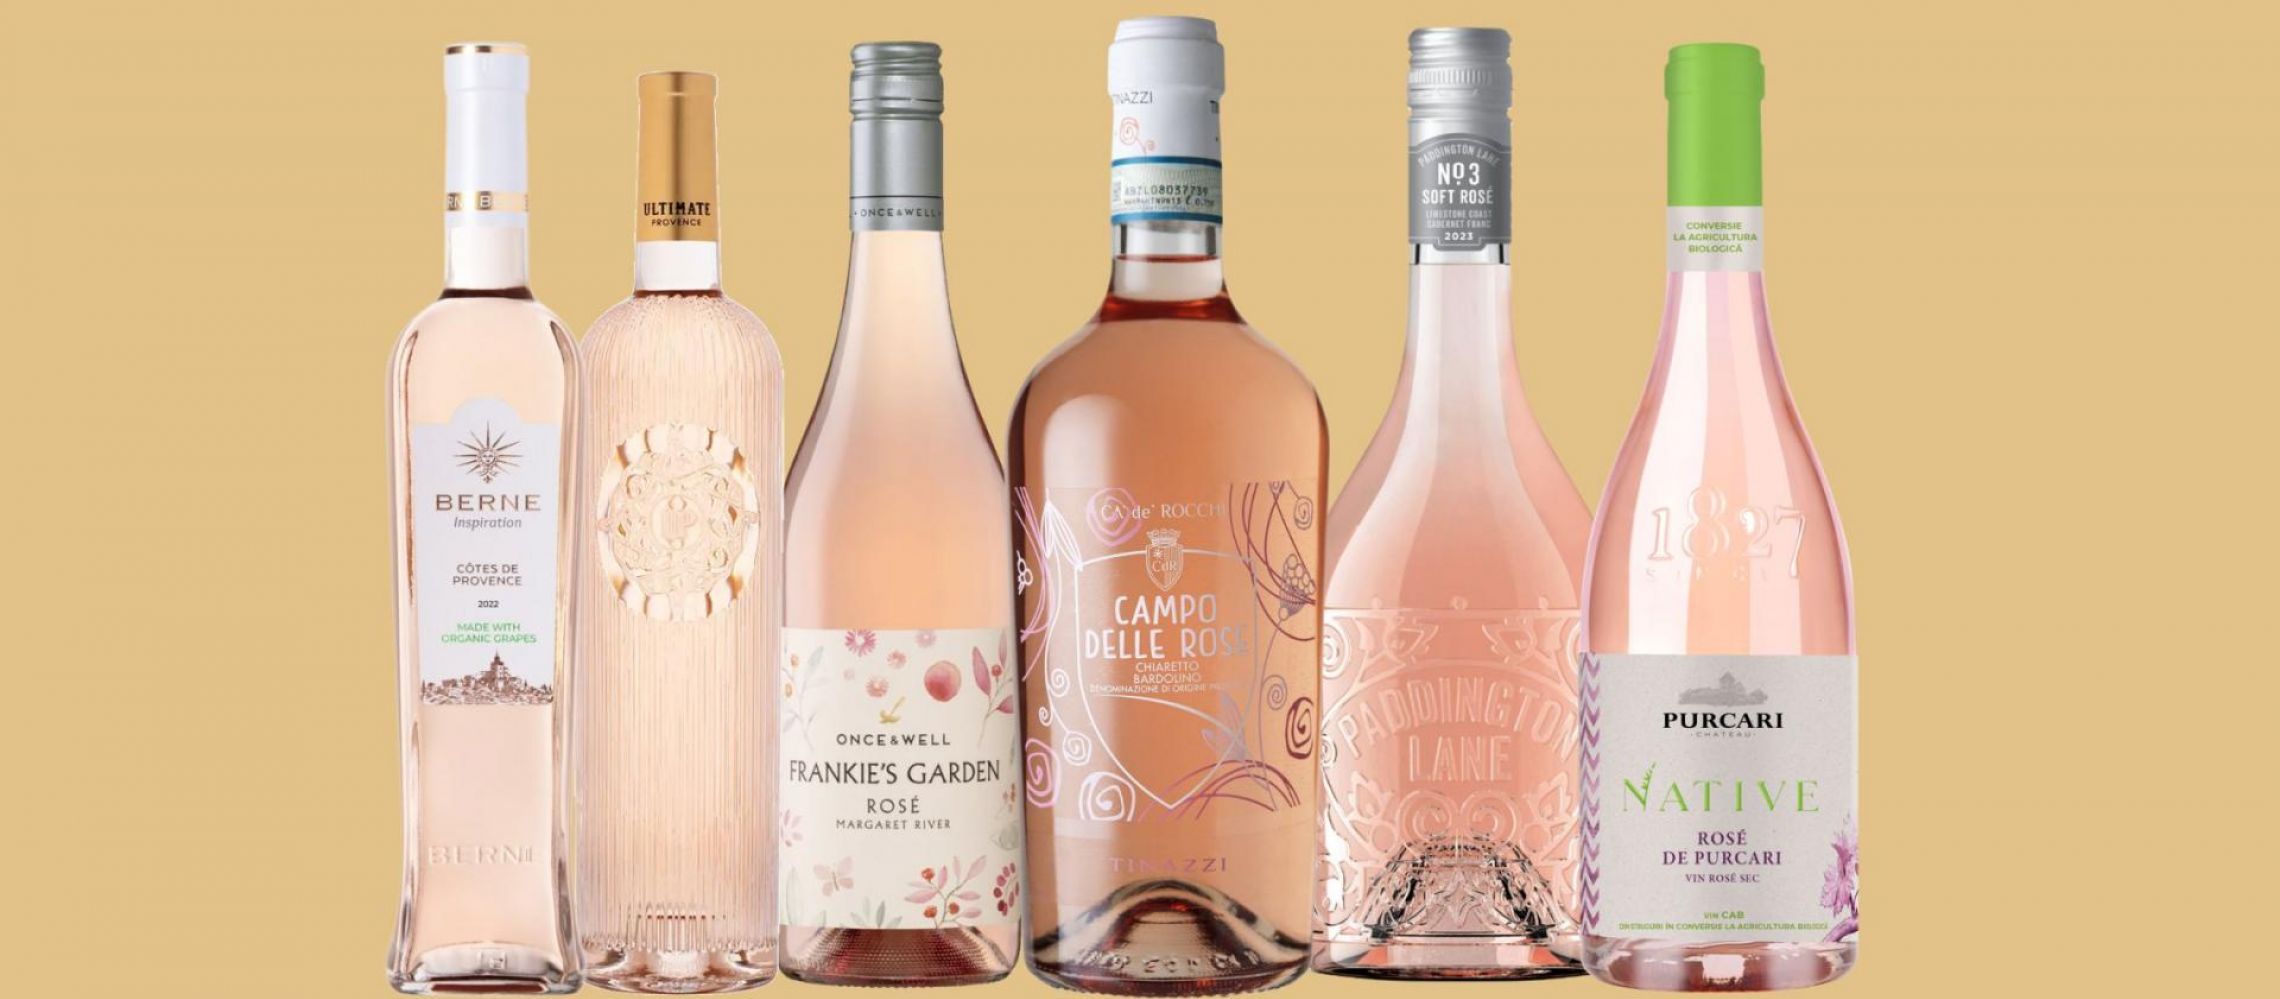 Photo for: The Top 6 Rosé Wineries for Restaurants and Sommeliers